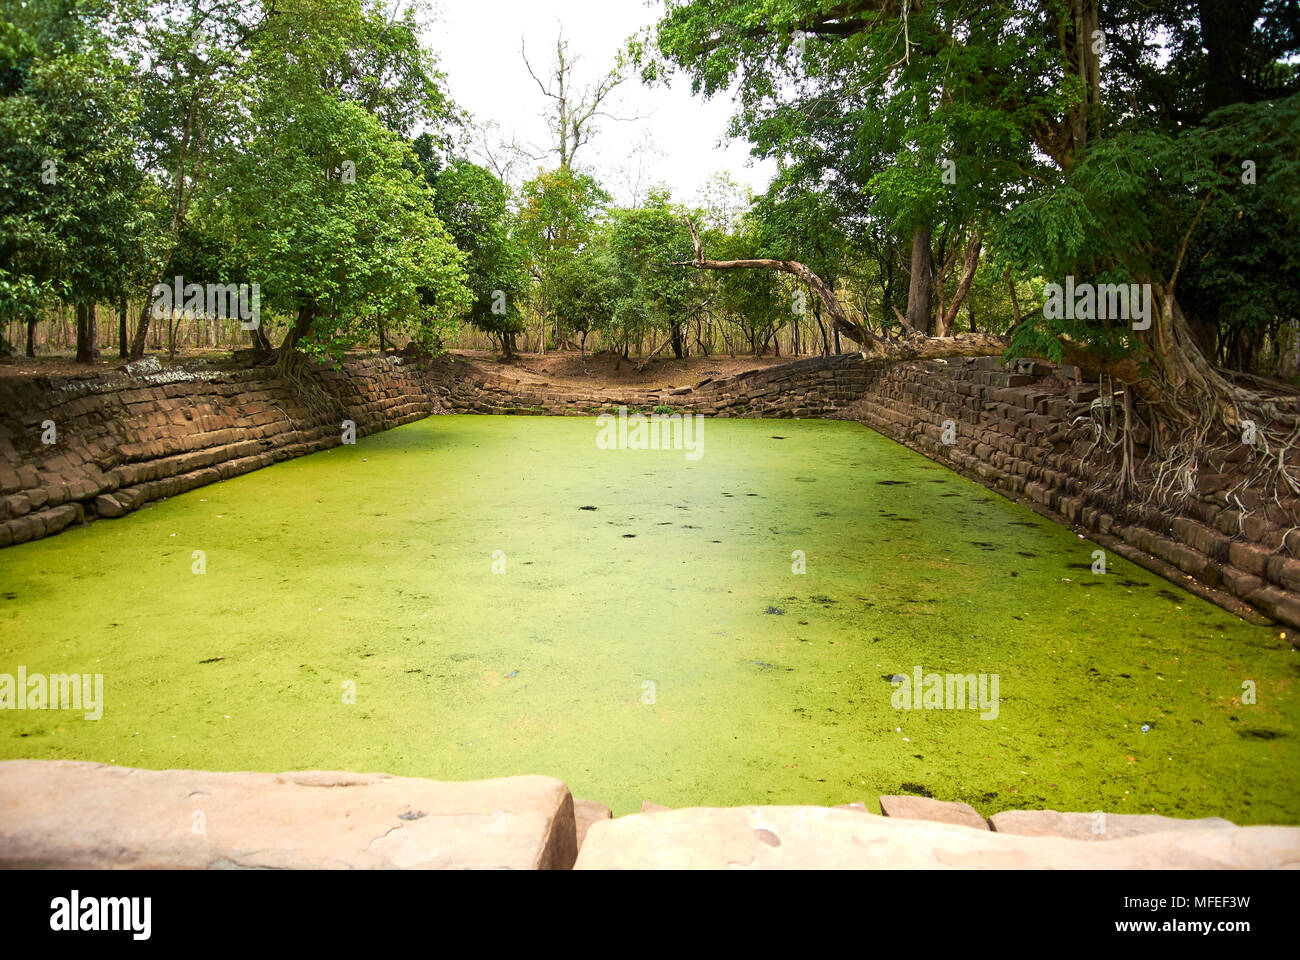 200 m (219 yd) south of the double-sanctuary Prasat Thom/Prang is a basin dug into the earth with a length of 40 m (44 yd). It has steps of laterite o Stock Photo